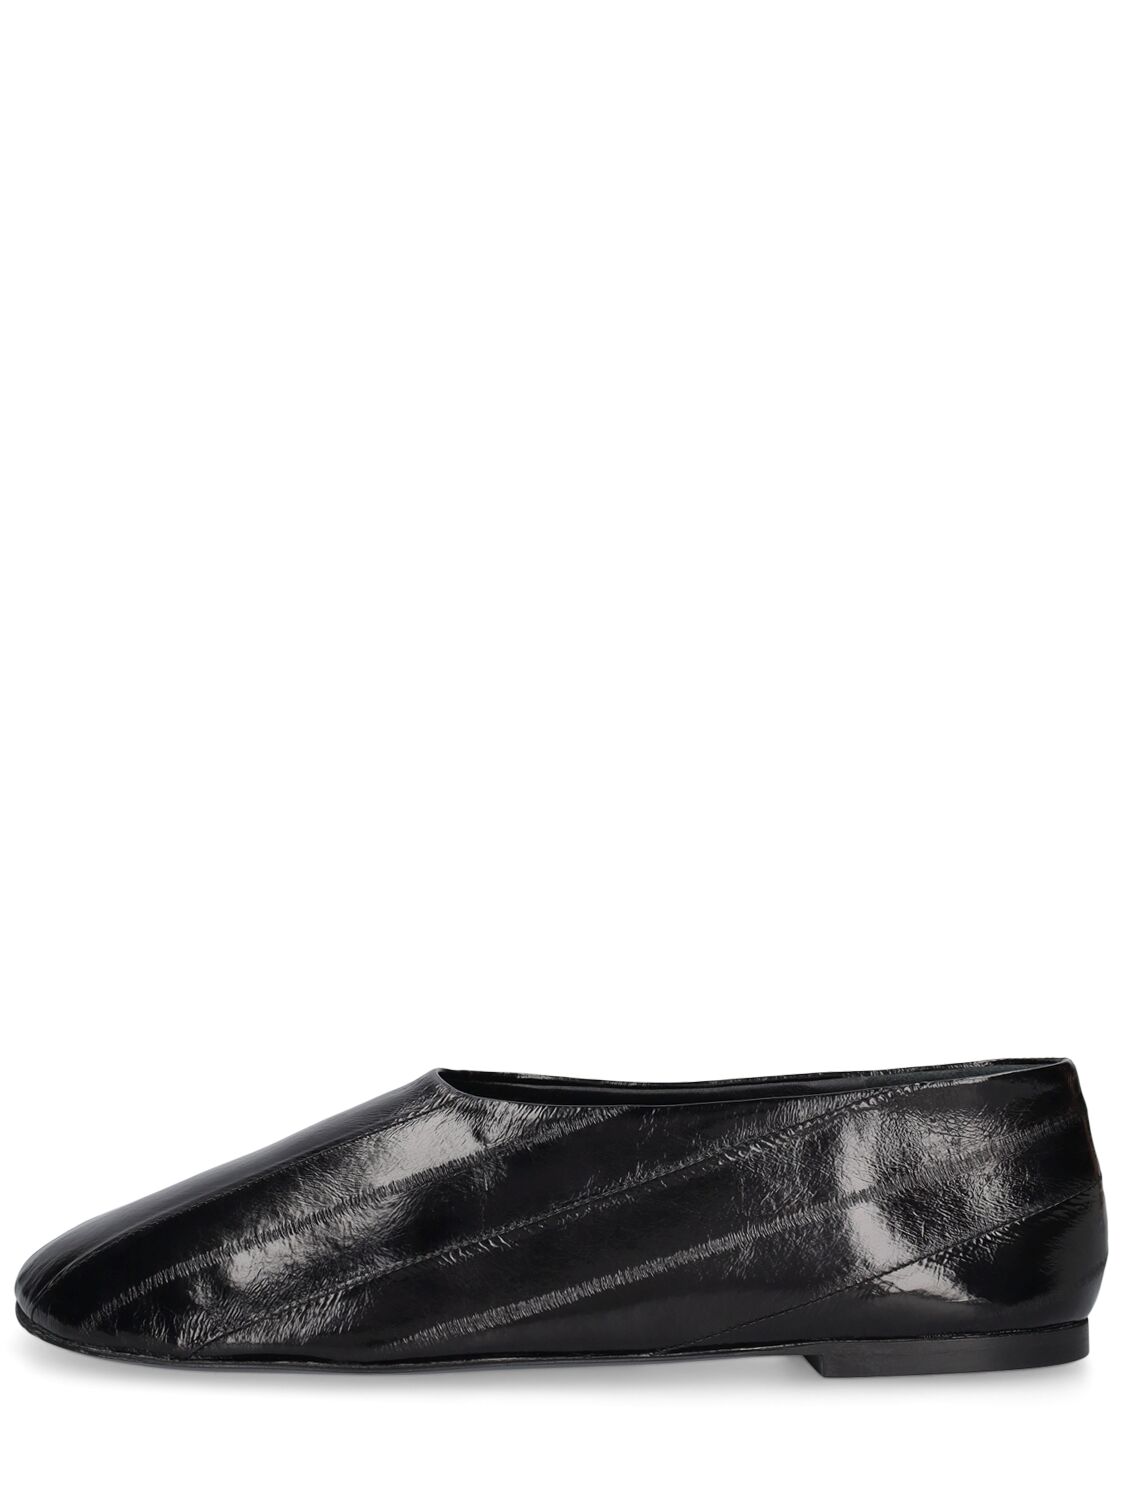 Proenza Schouler 10mm Glove Shiny Leather Slippers In Black